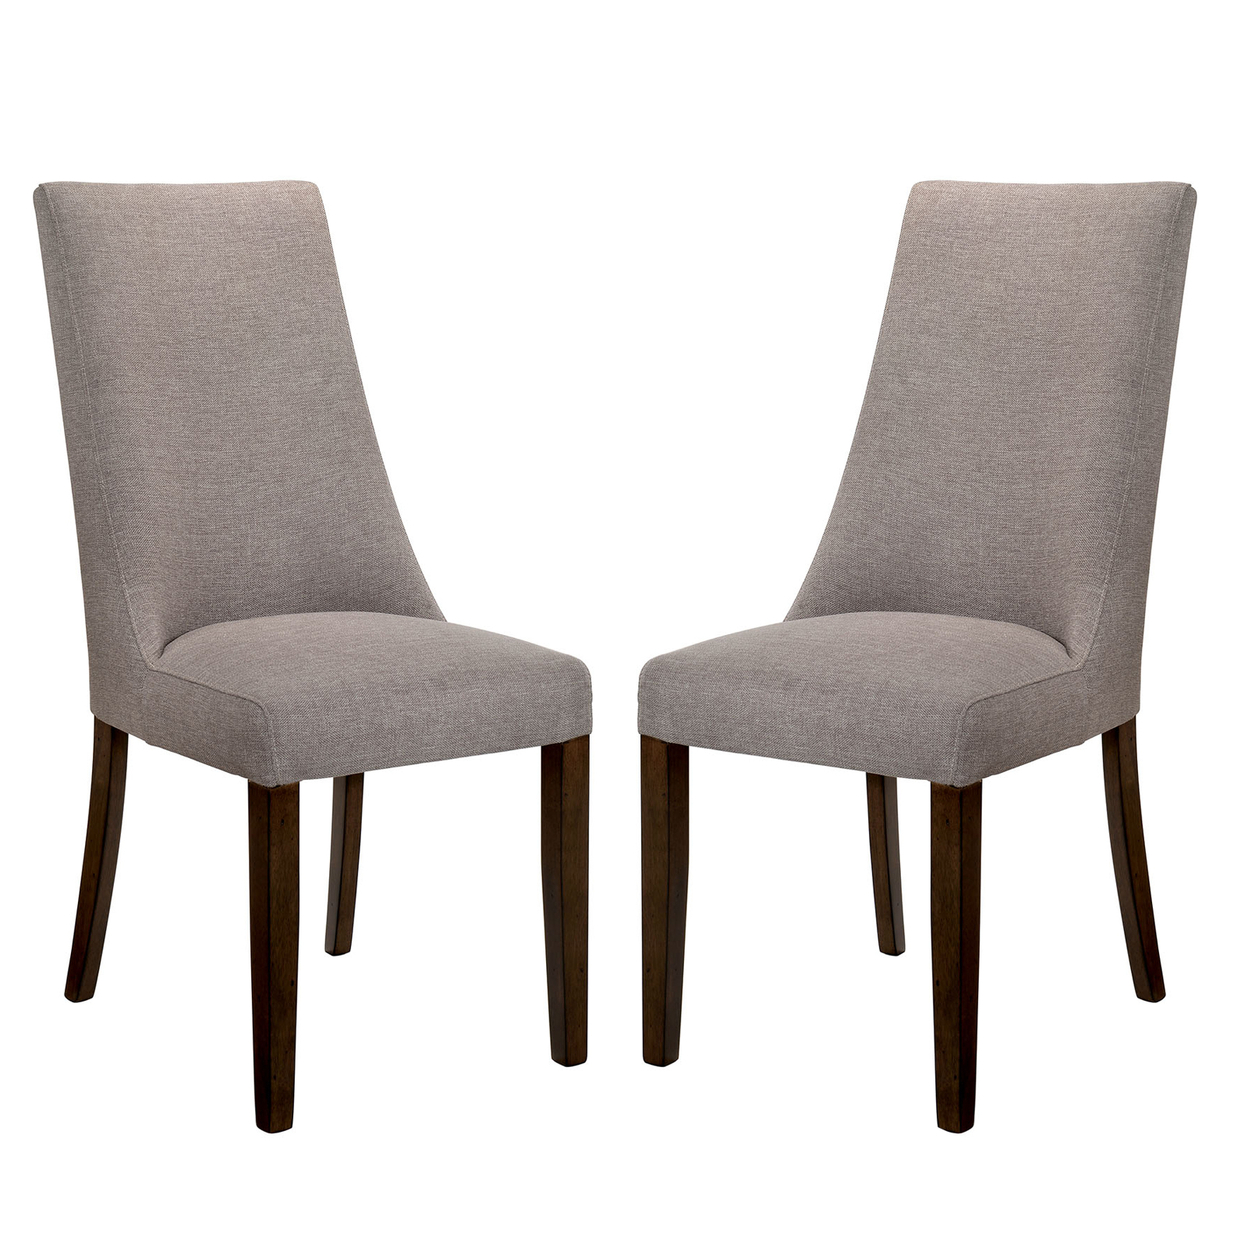 Rustic Solid Wood And Fabric Upholstered Padded Side Chair, Pack Of Two, Brown And Gray- Saltoro Sherpi